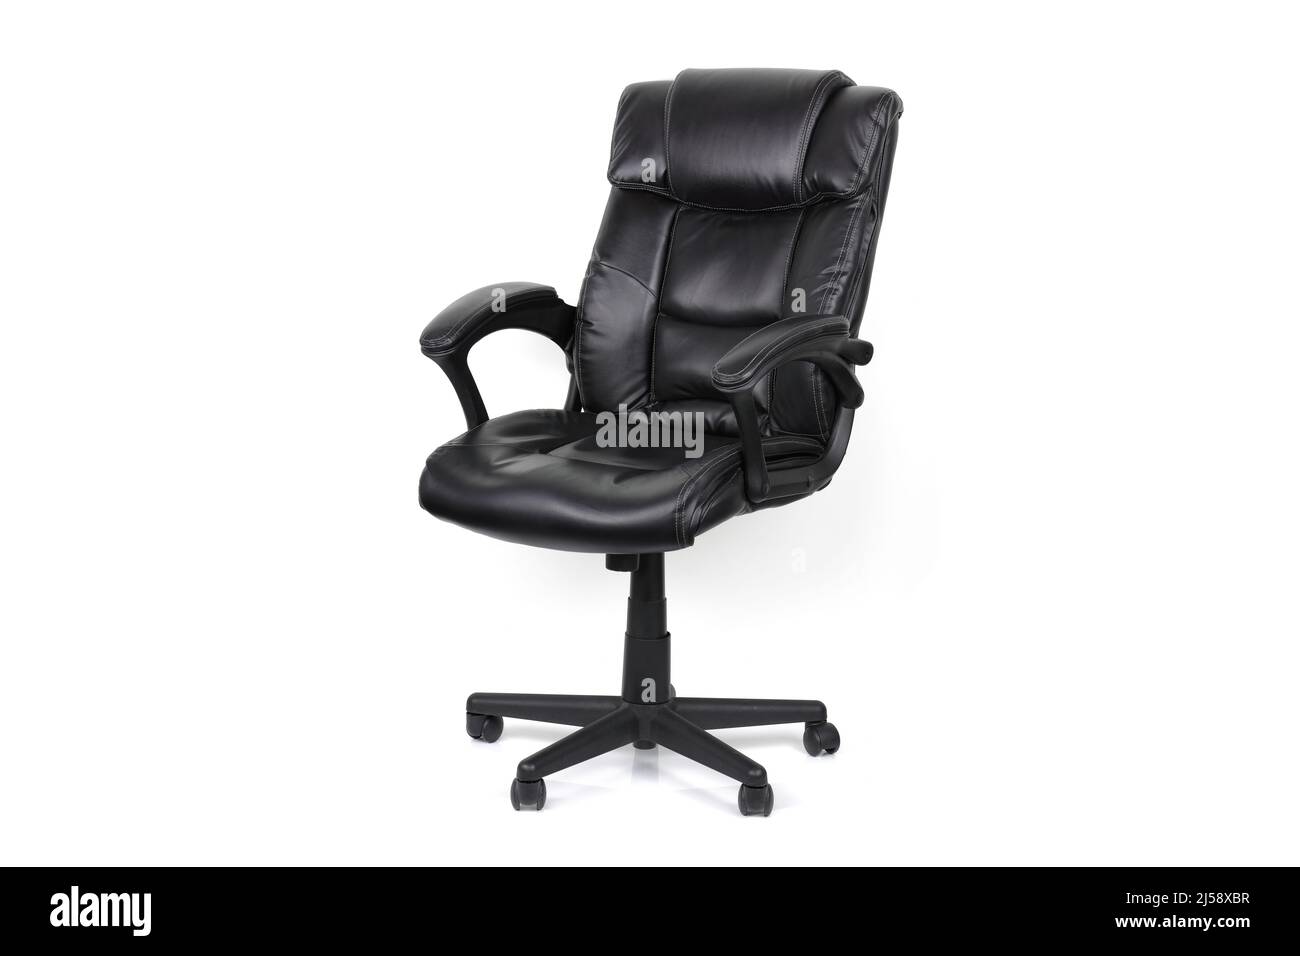 Office chair on white with clipping path Stock Photo